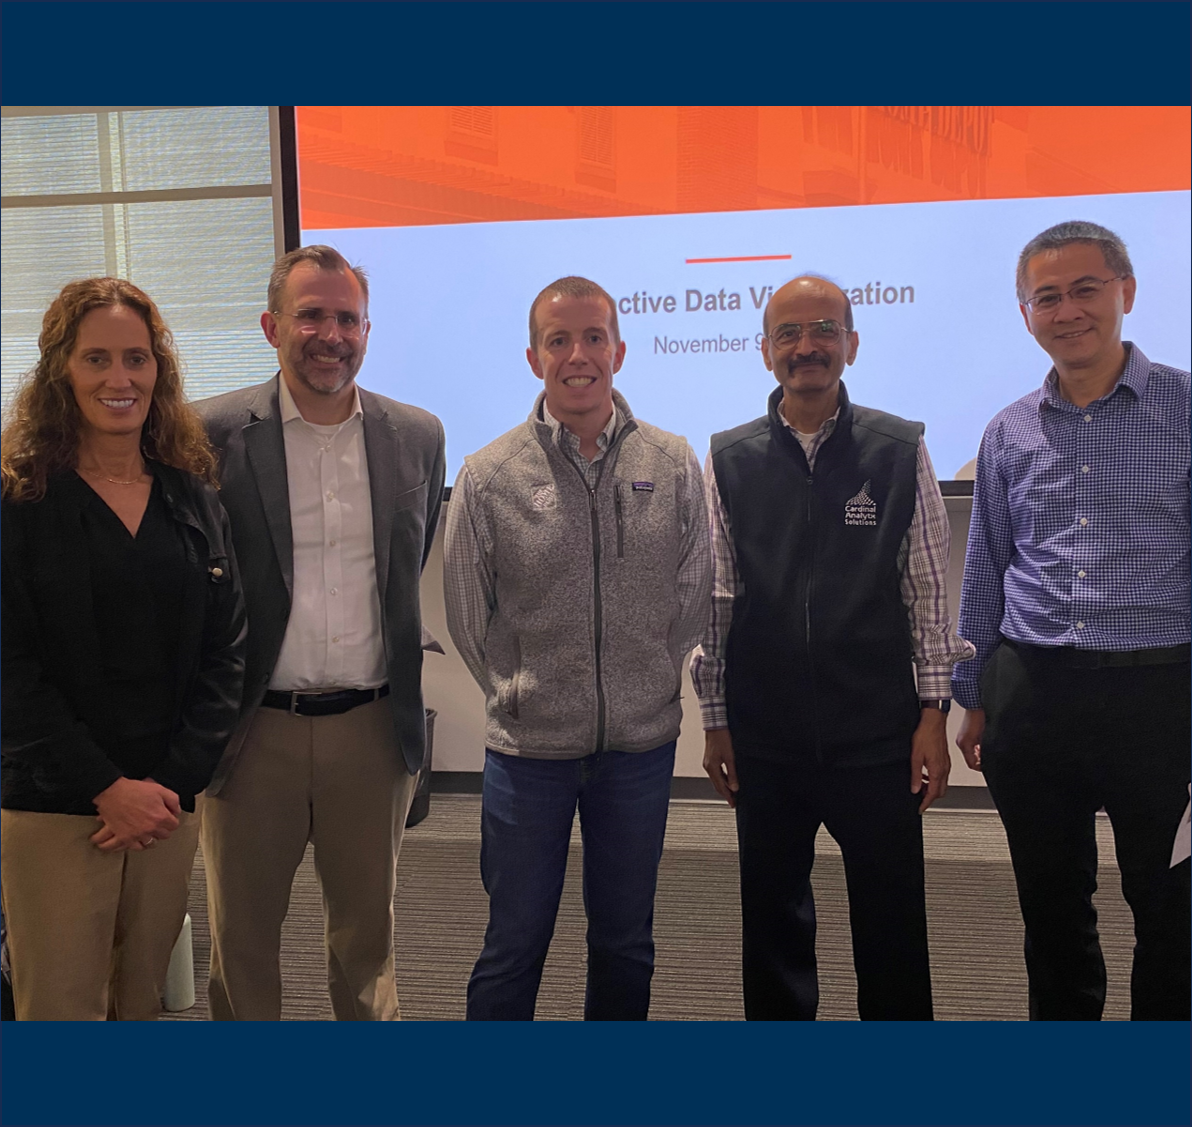 Michael Carpenter's talk attracted both students and Scheller faculty. (From left to right): Business Analytics Center Corporate Engagement Manager Sherri von Behren; Scheller College of Business Interim Dean Jonathan Clarke; Home Depot Director - Decision Analytics Michael Carpenter; Business Analytic Center Faculty Director Sri Narasimhan; and Dean’s Distinguished Term Professor Mingfeng Lin.